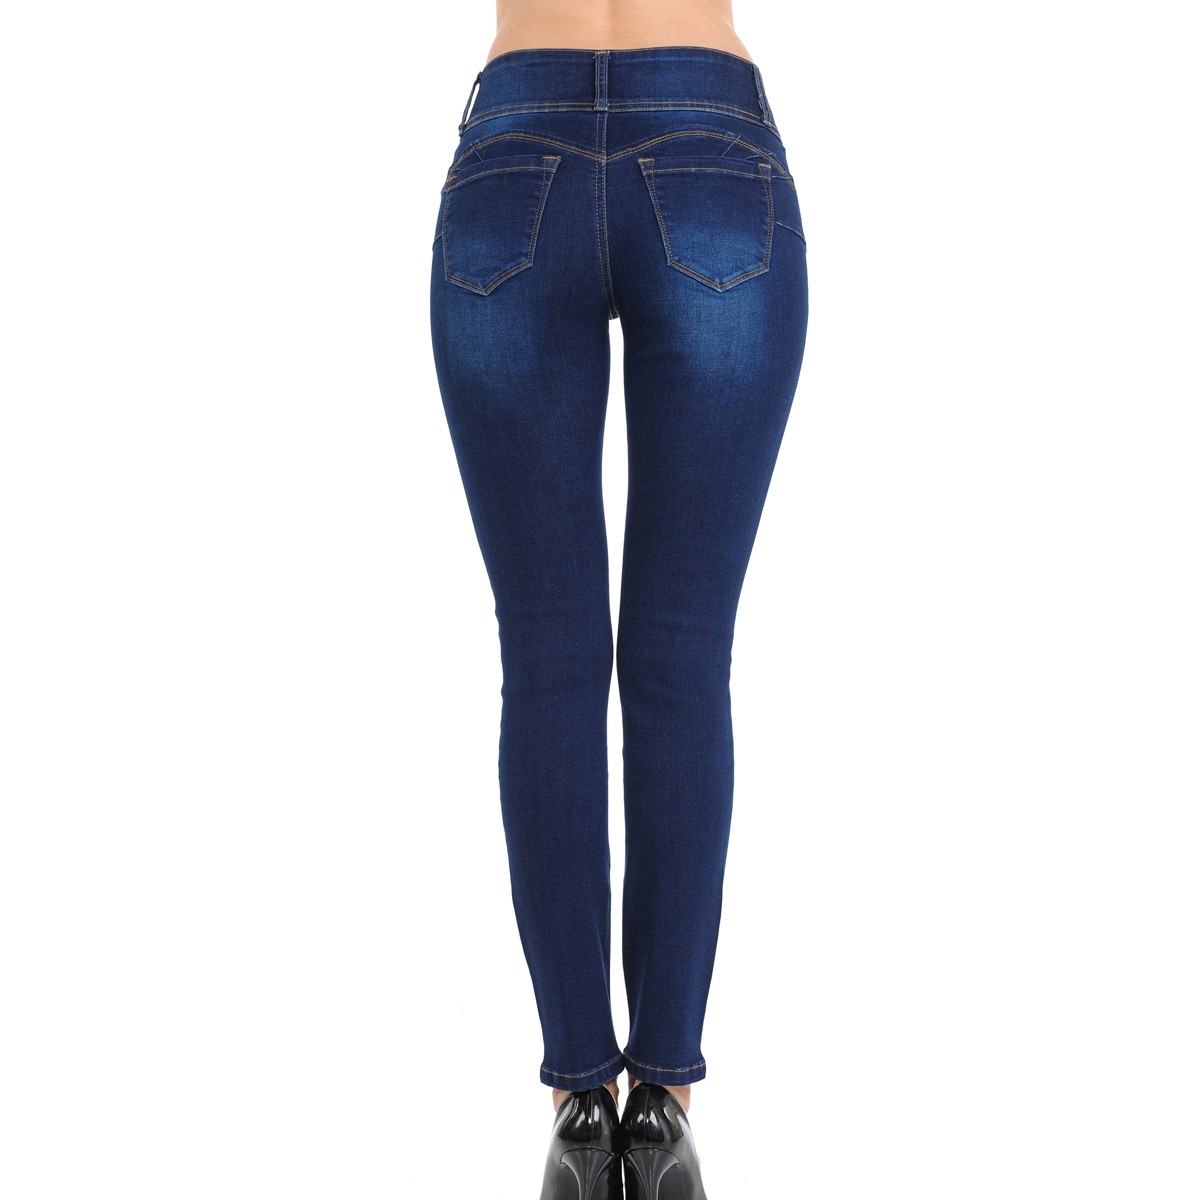 Juniors' Super Stretch 3-Button Waistband Jeans - image 2 of 2